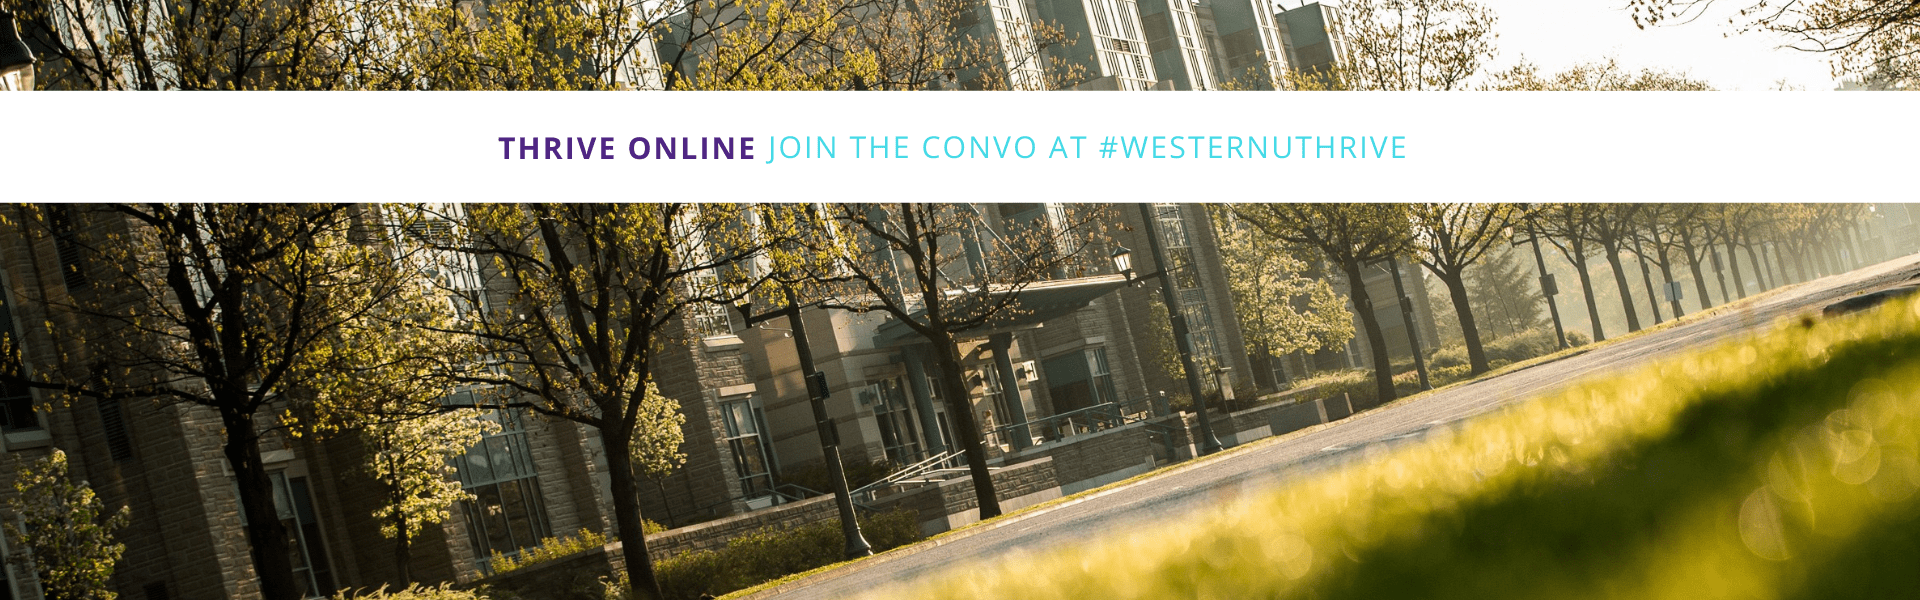 Join the conversation on #WesternUThrive